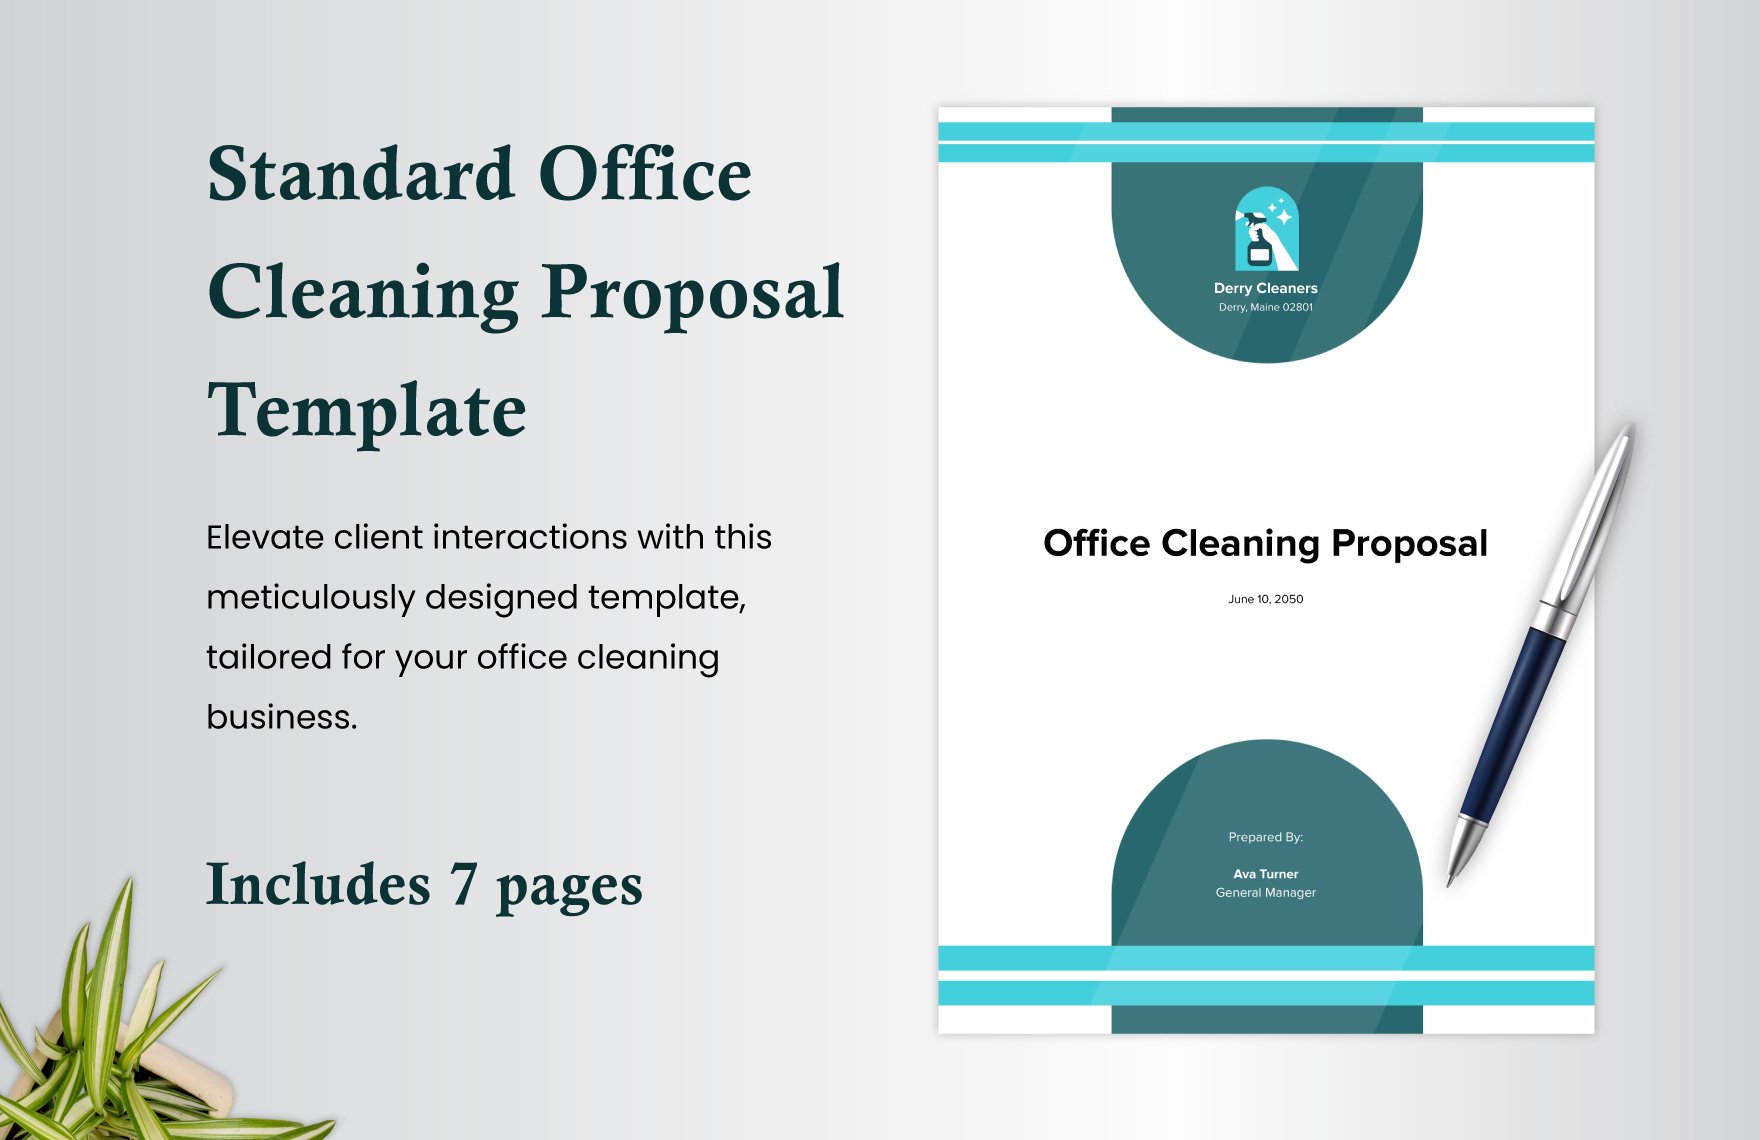 Standard Office Cleaning Proposal Template